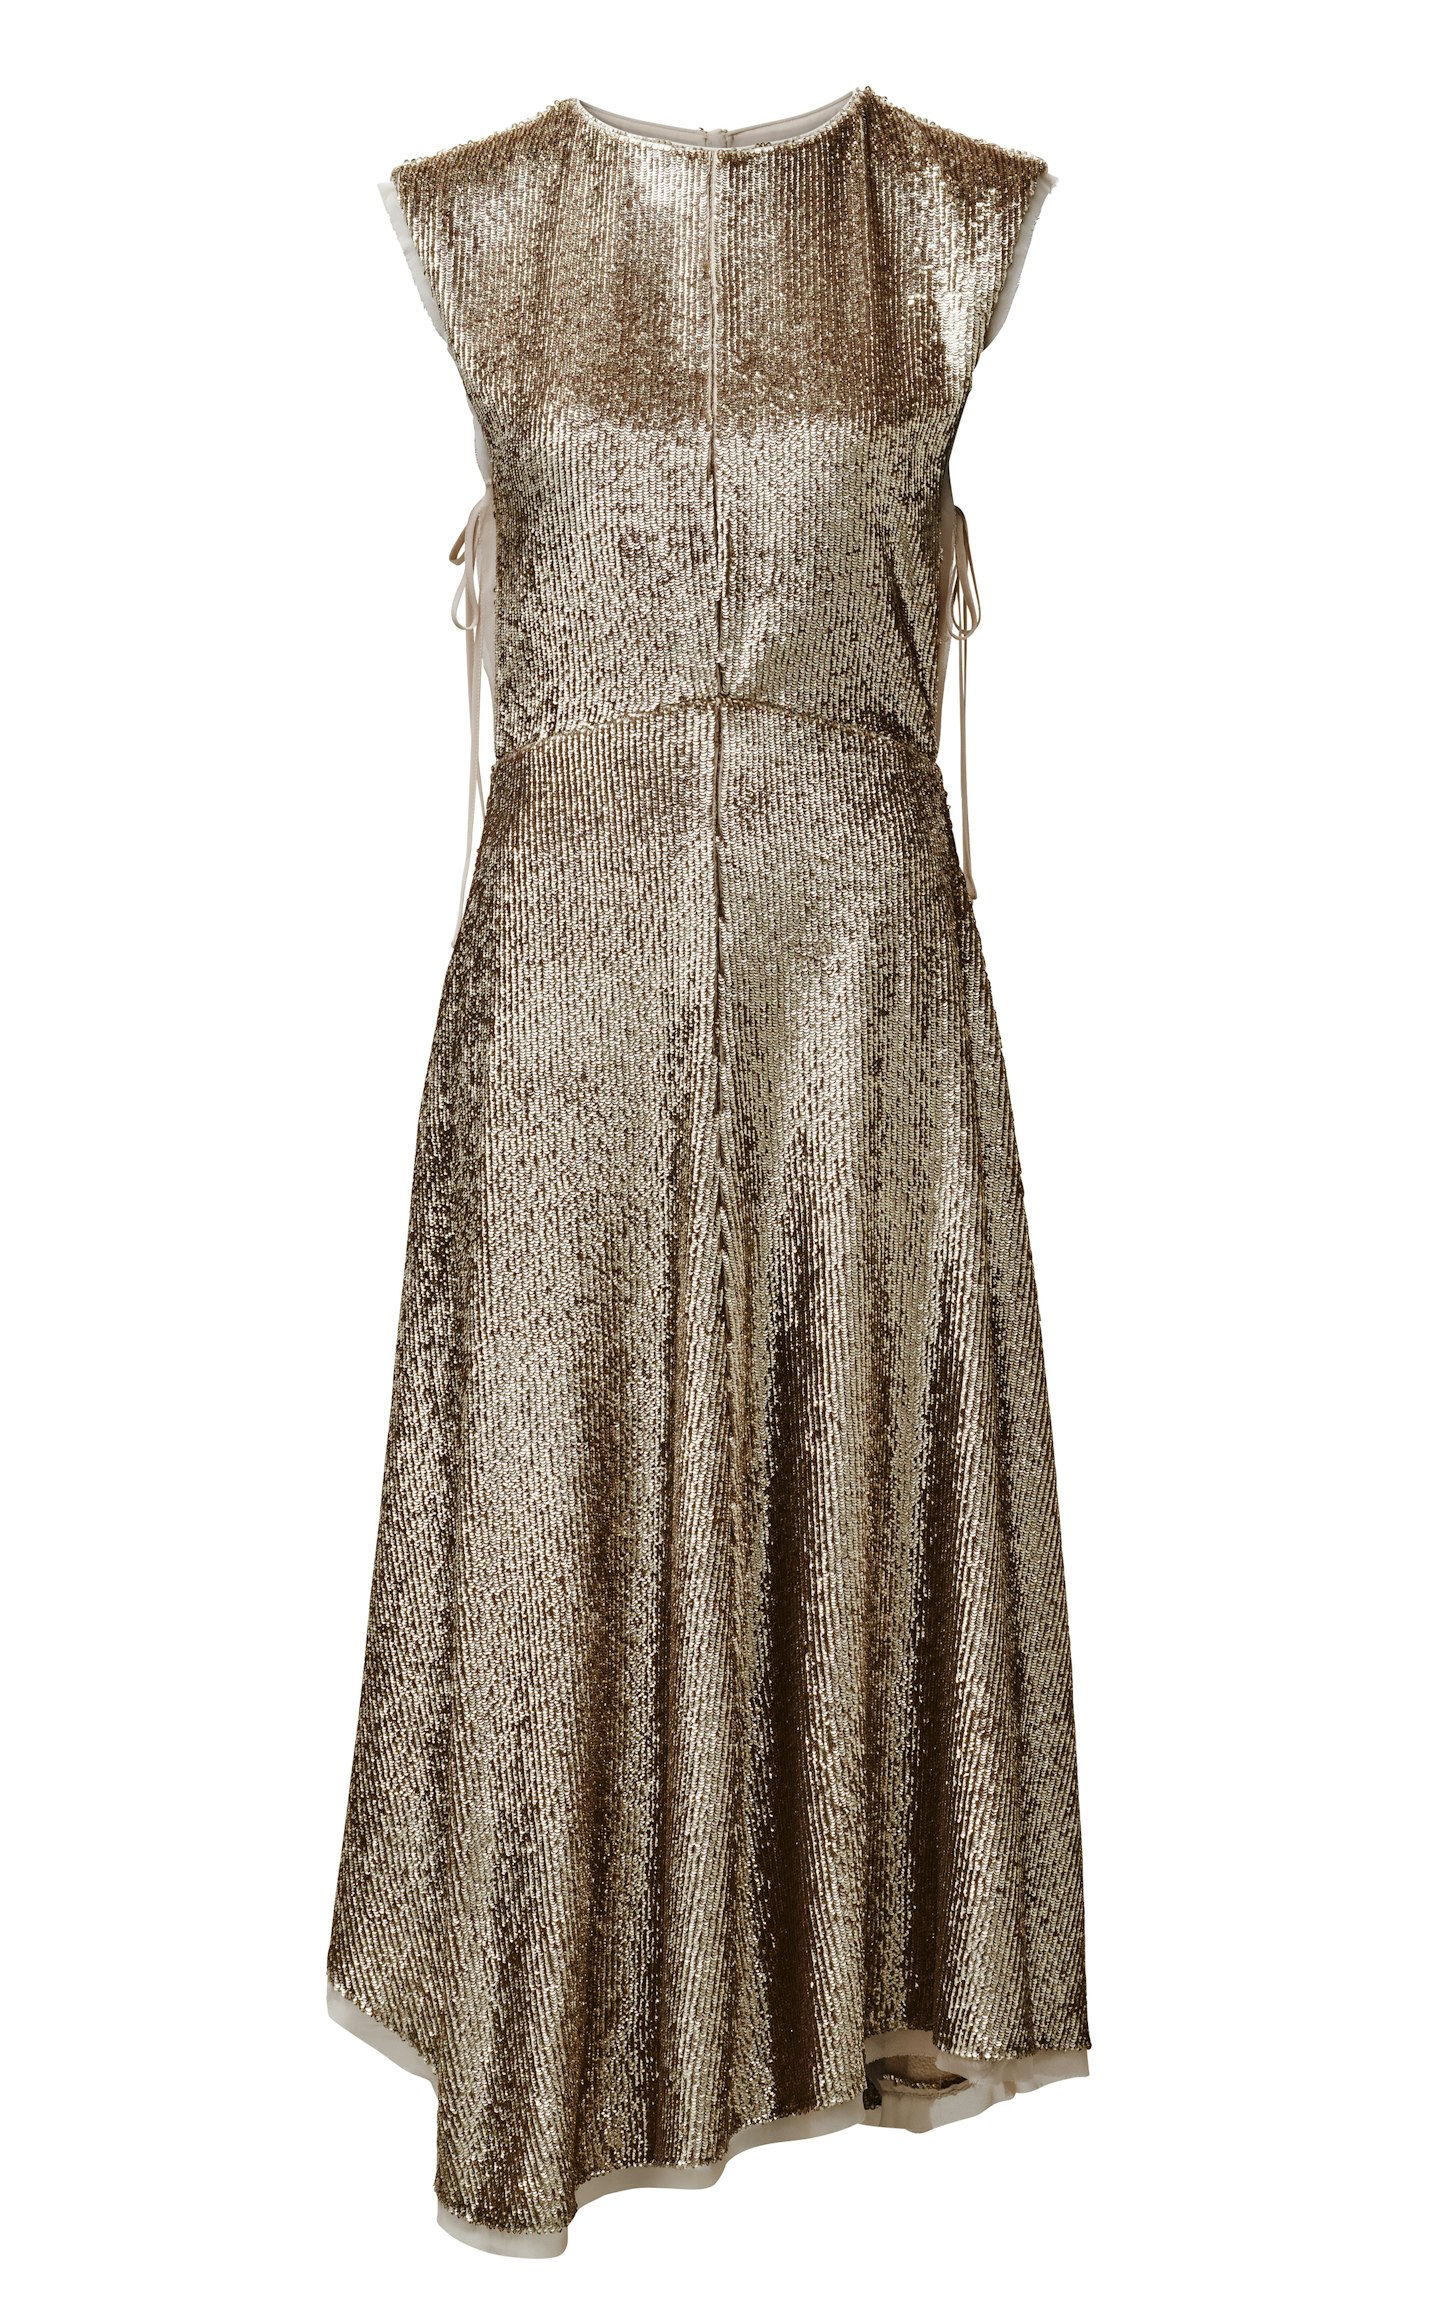 Sequined Dress, £199.99